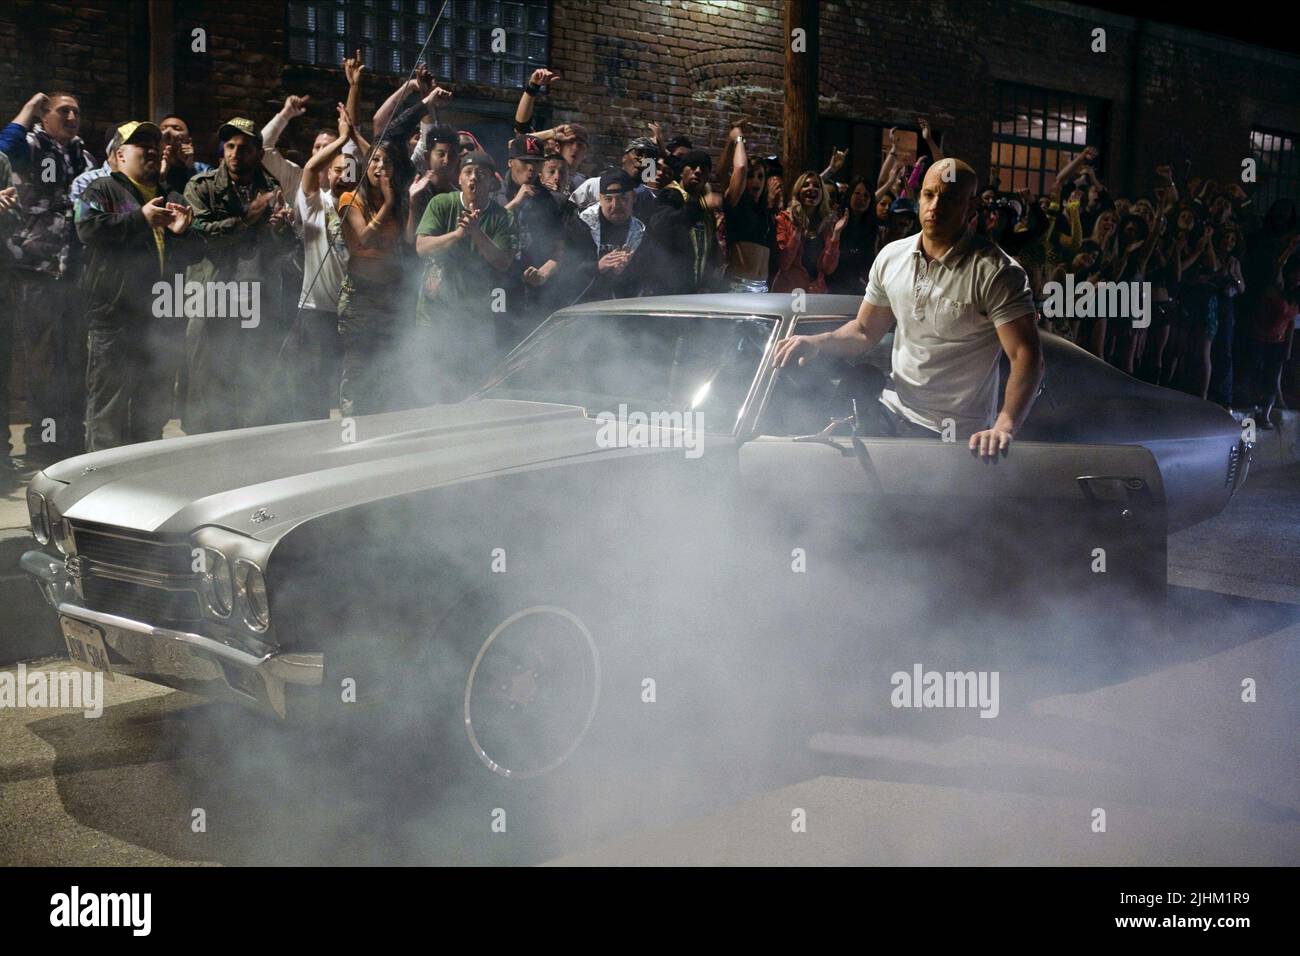 VIN DIESEL, FAST and FURIOUS, 2009 Stock Photo